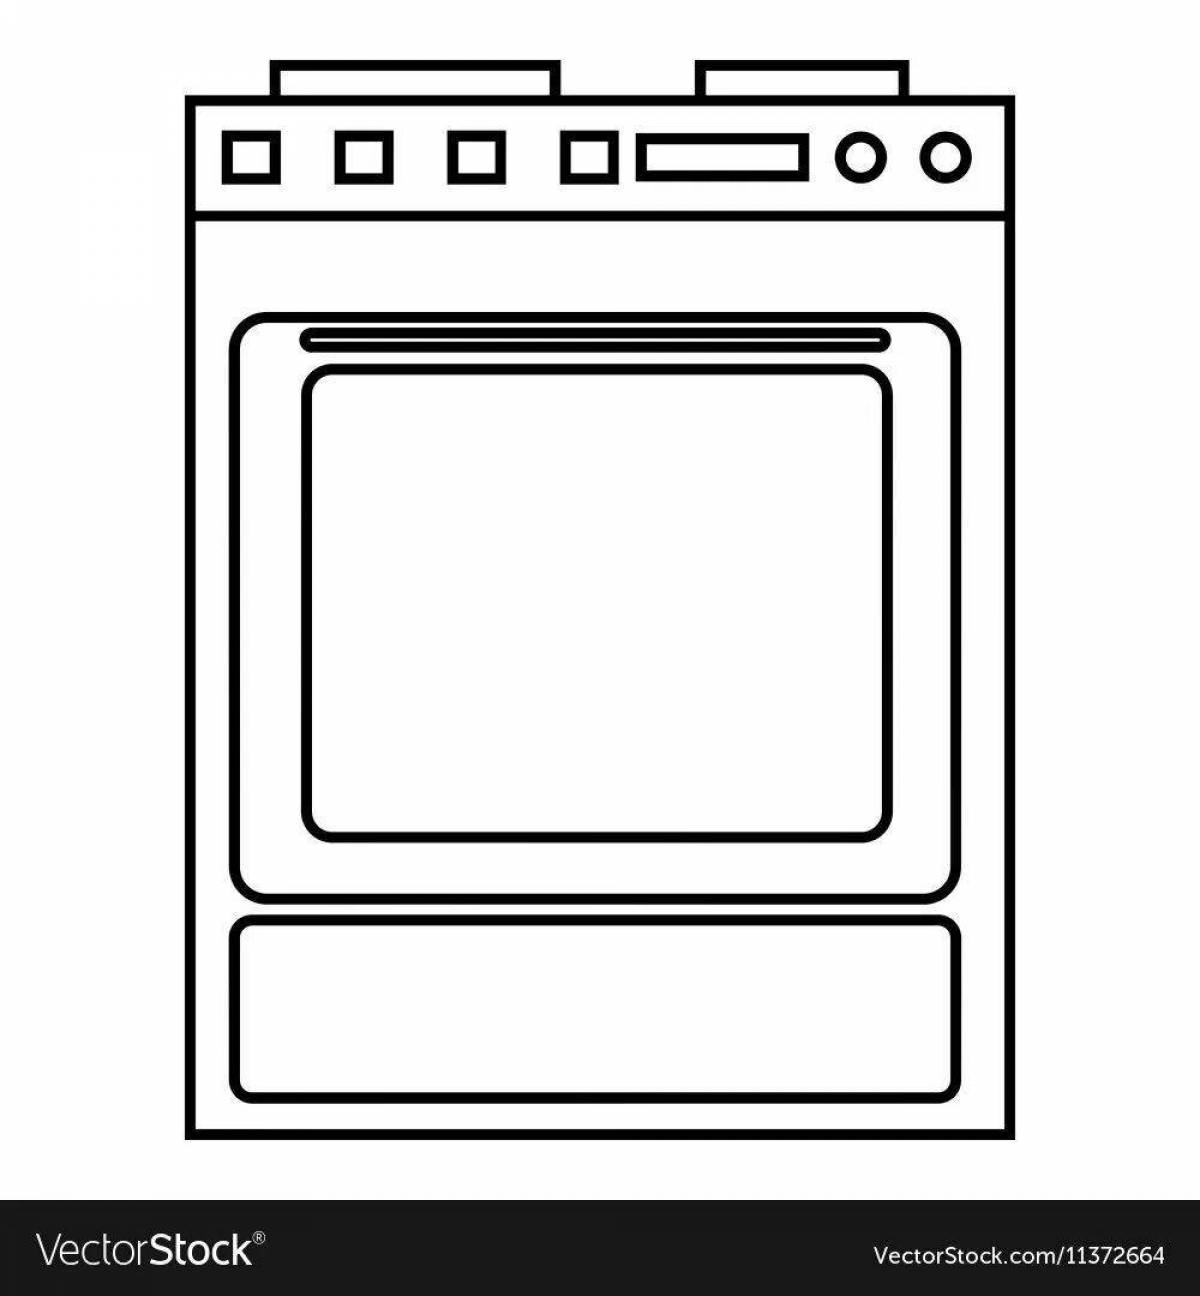 Bright oven coloring page